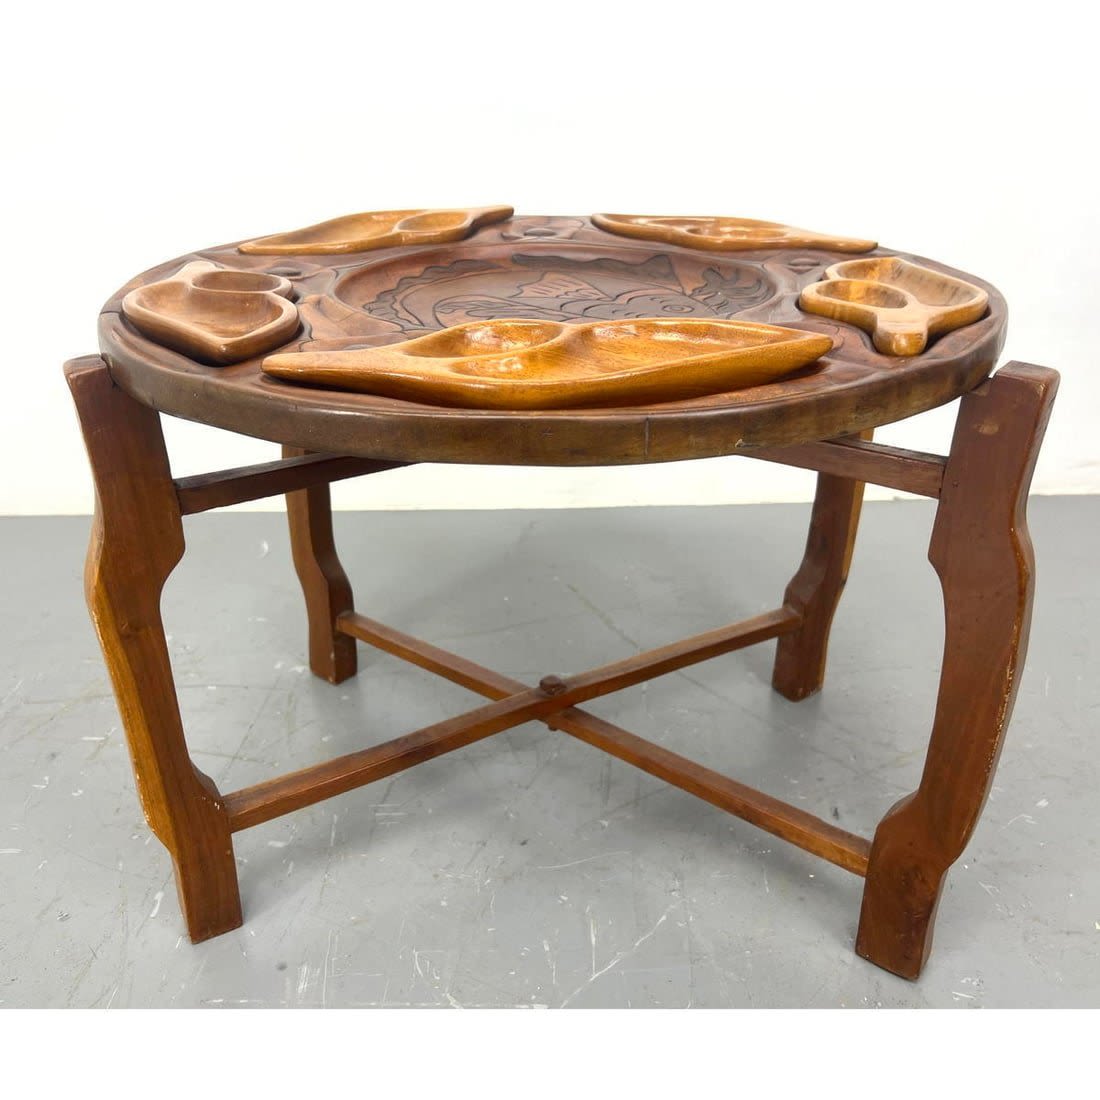 Carved Wood Round Coffee Table  362d98